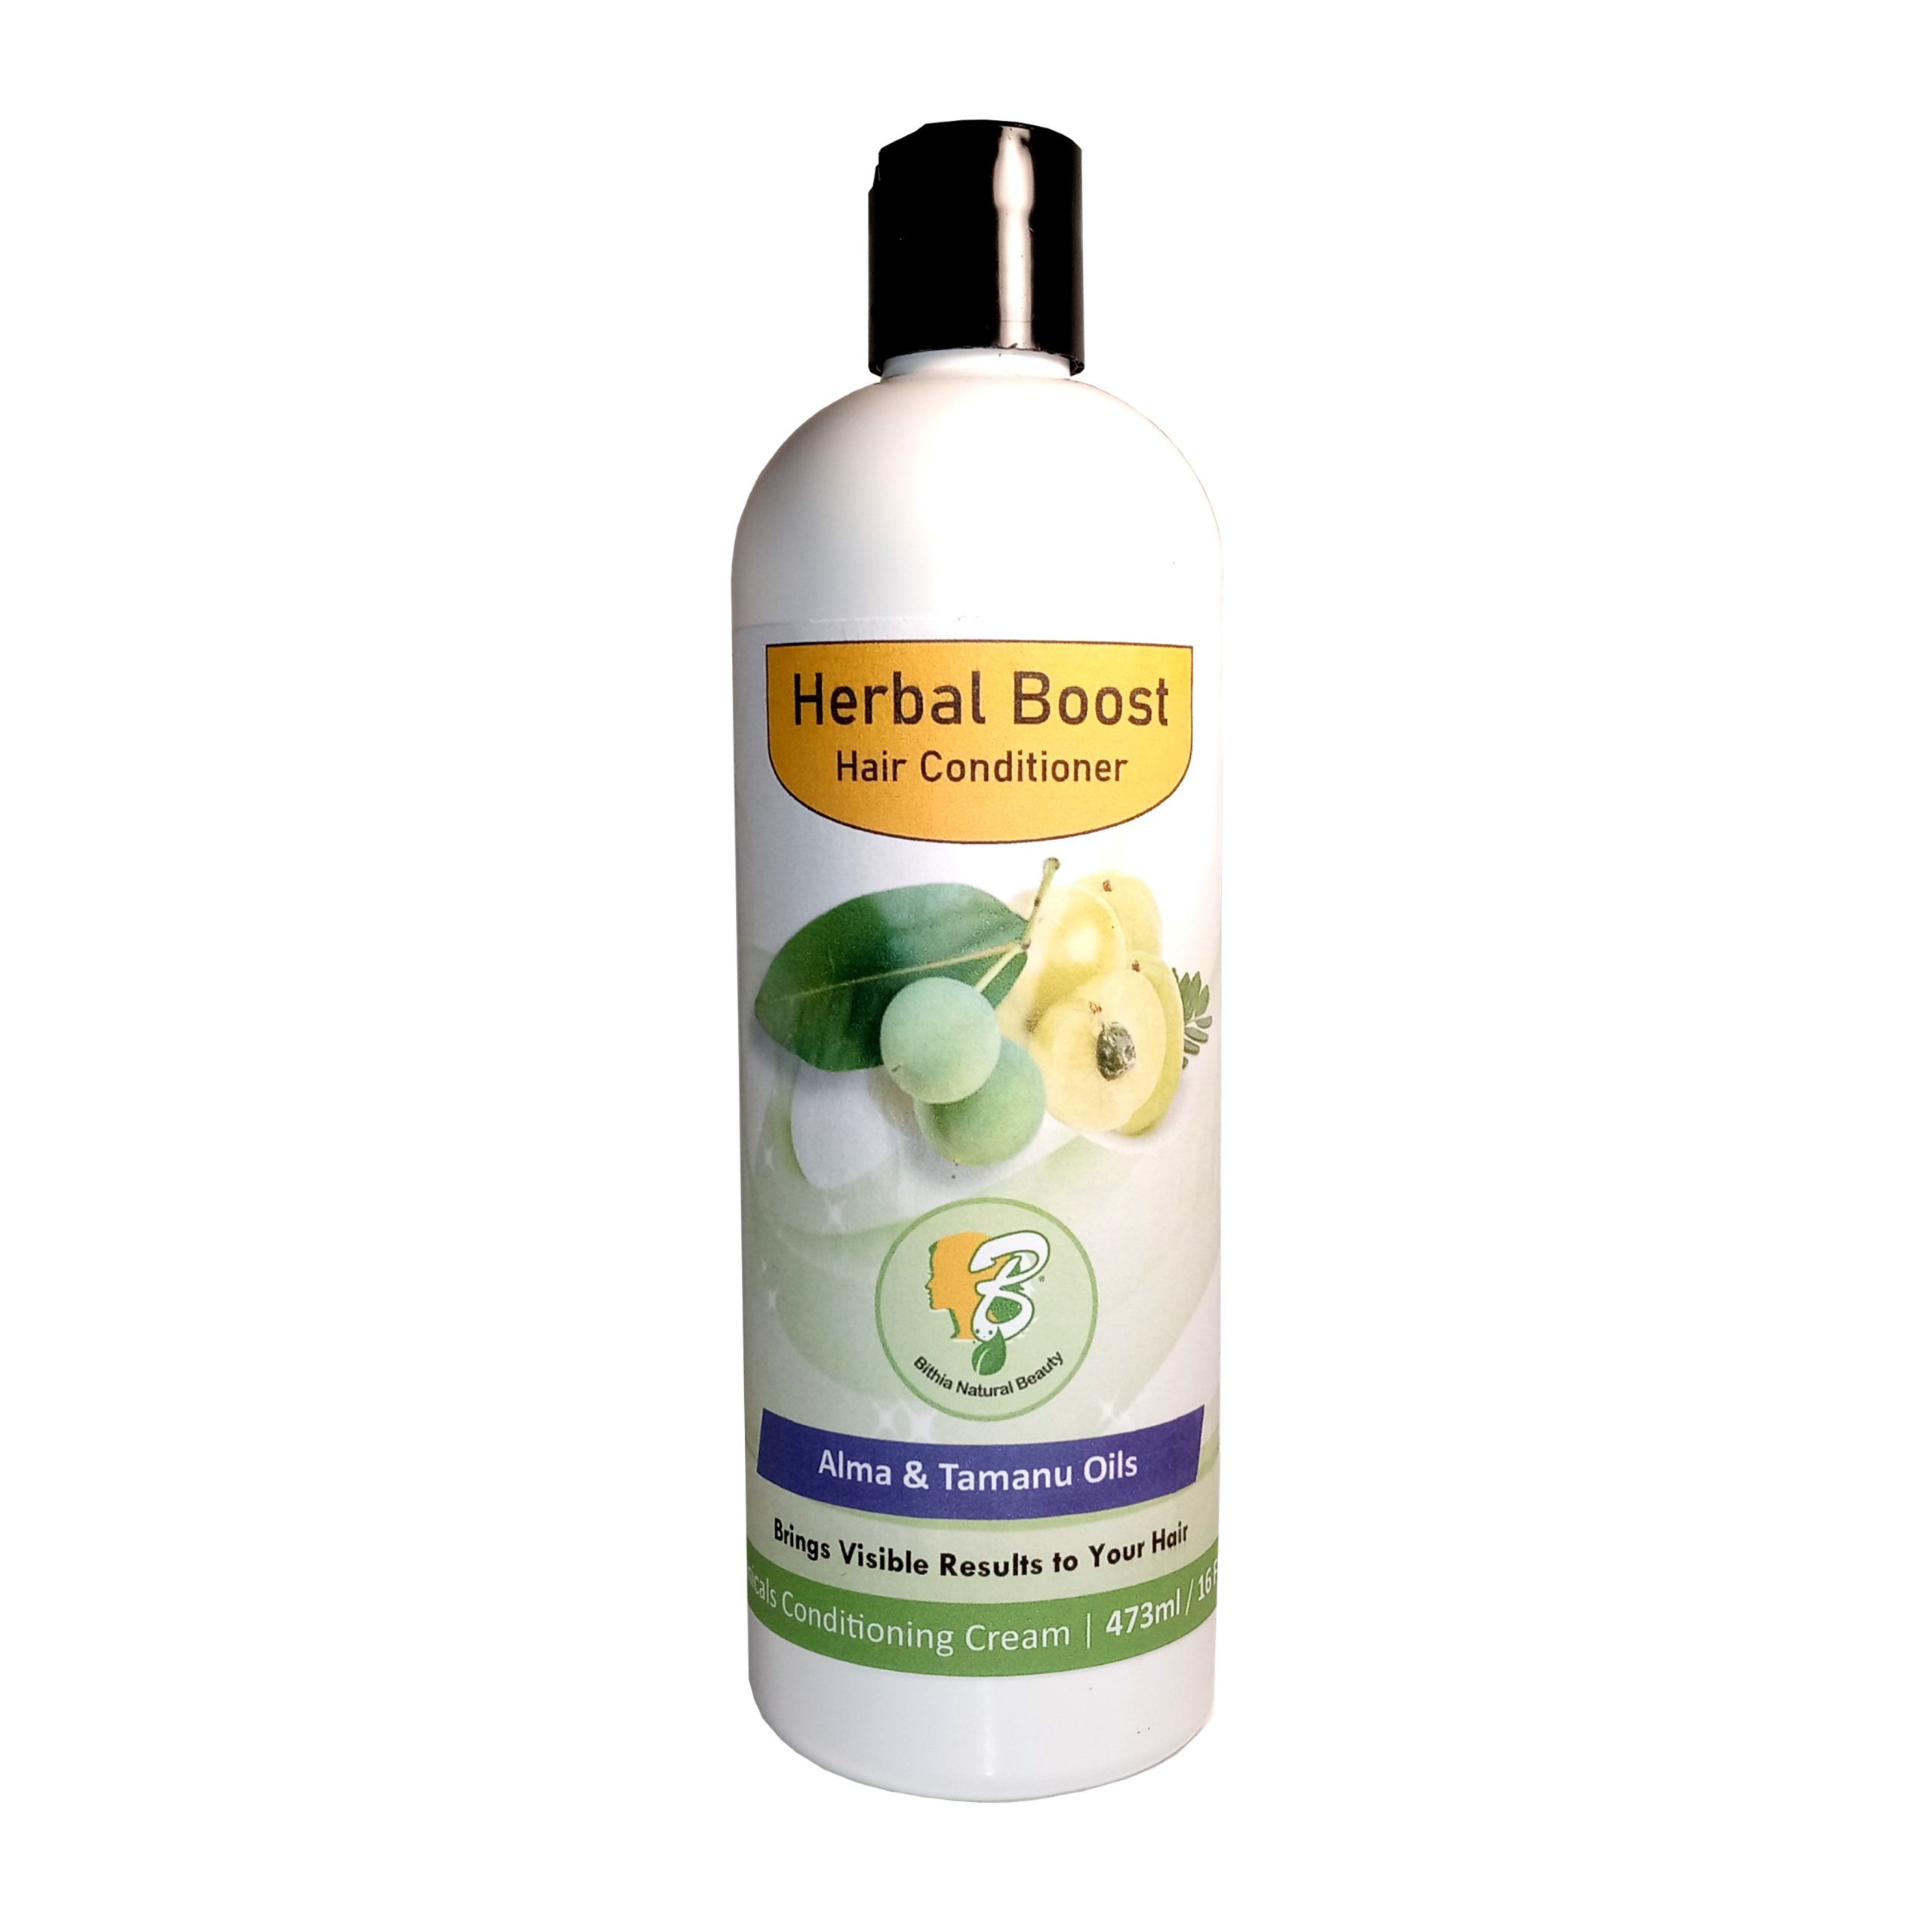 Herbal Boost Natural Hair Conditioner